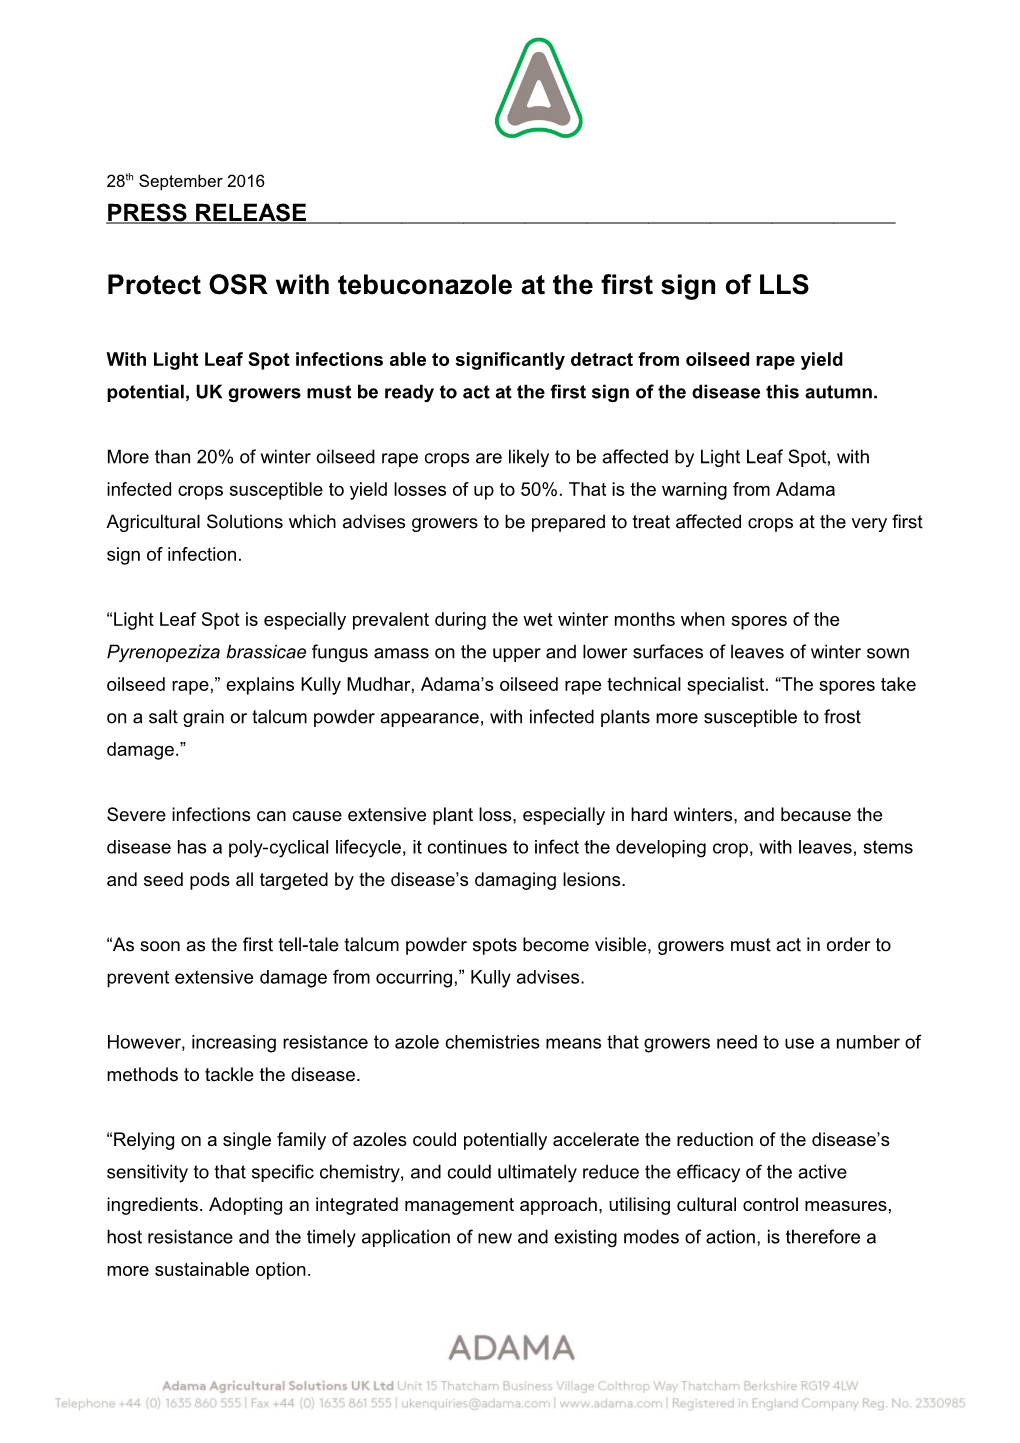 Protect OSR with Tebuconazole at the First Sign of LLS